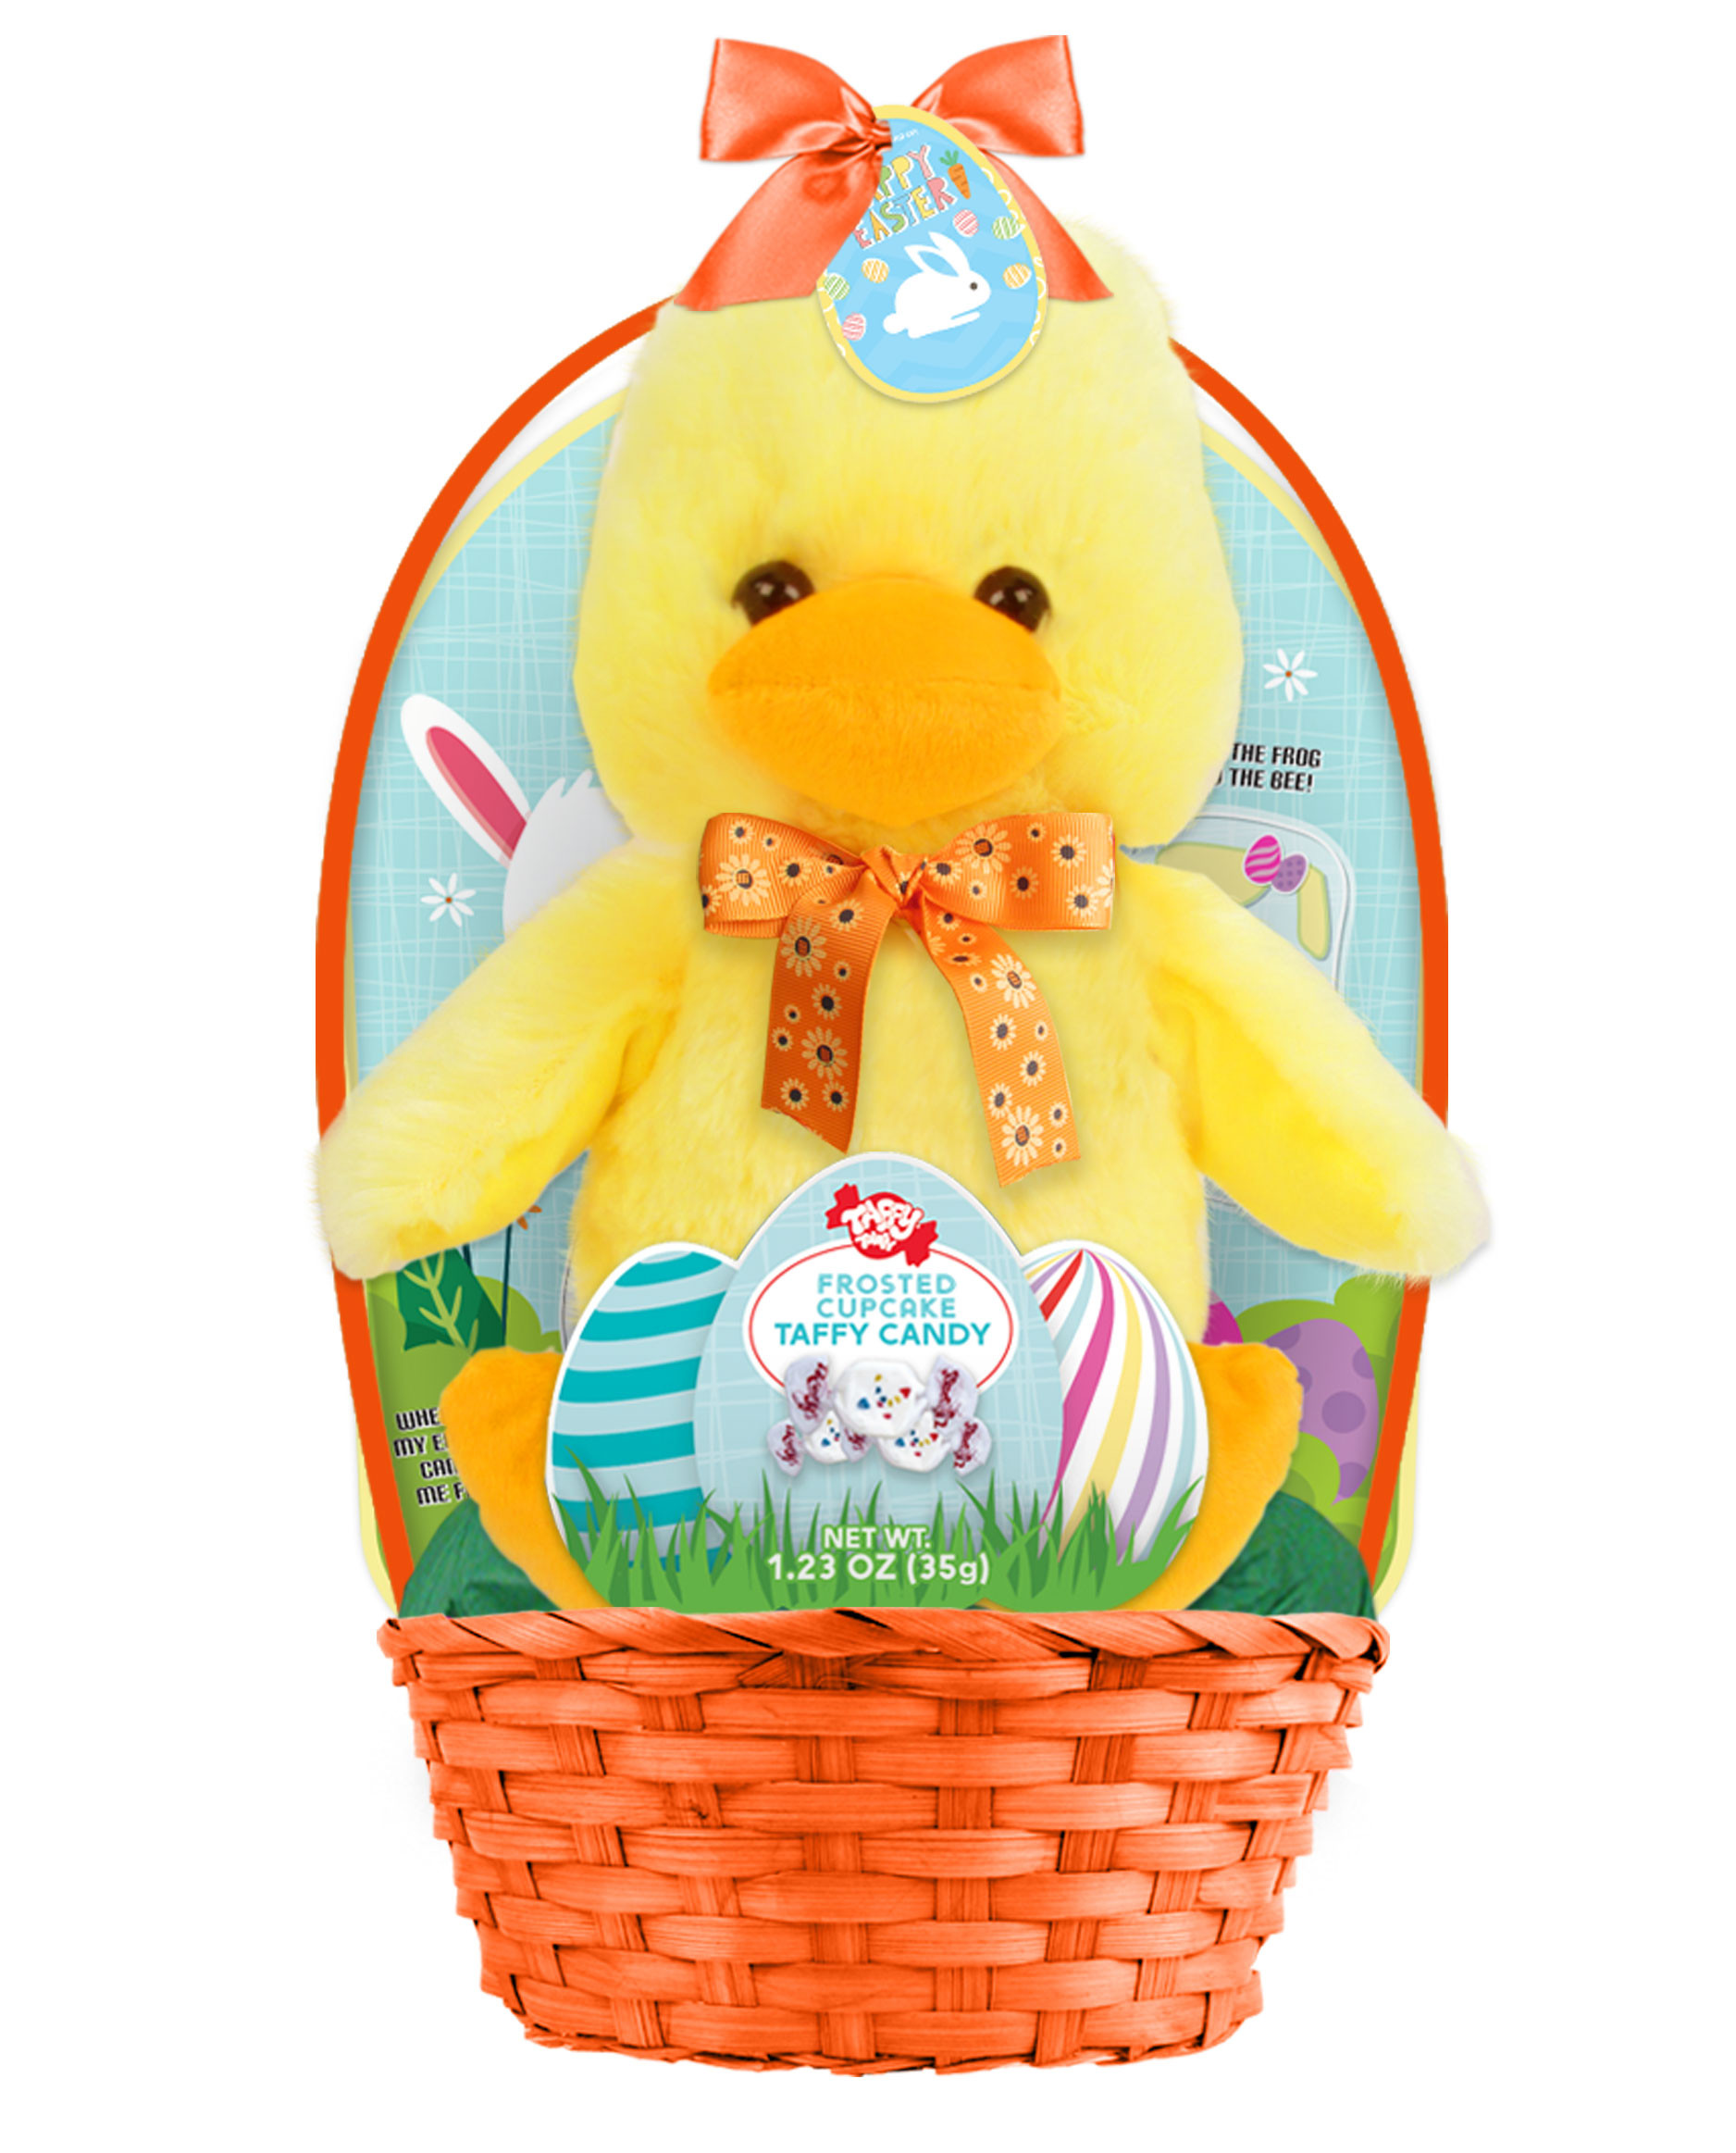 Walmart Easter Gifts
 Megatoys Plush Animal with Taffy Candy Easter Gift Basket